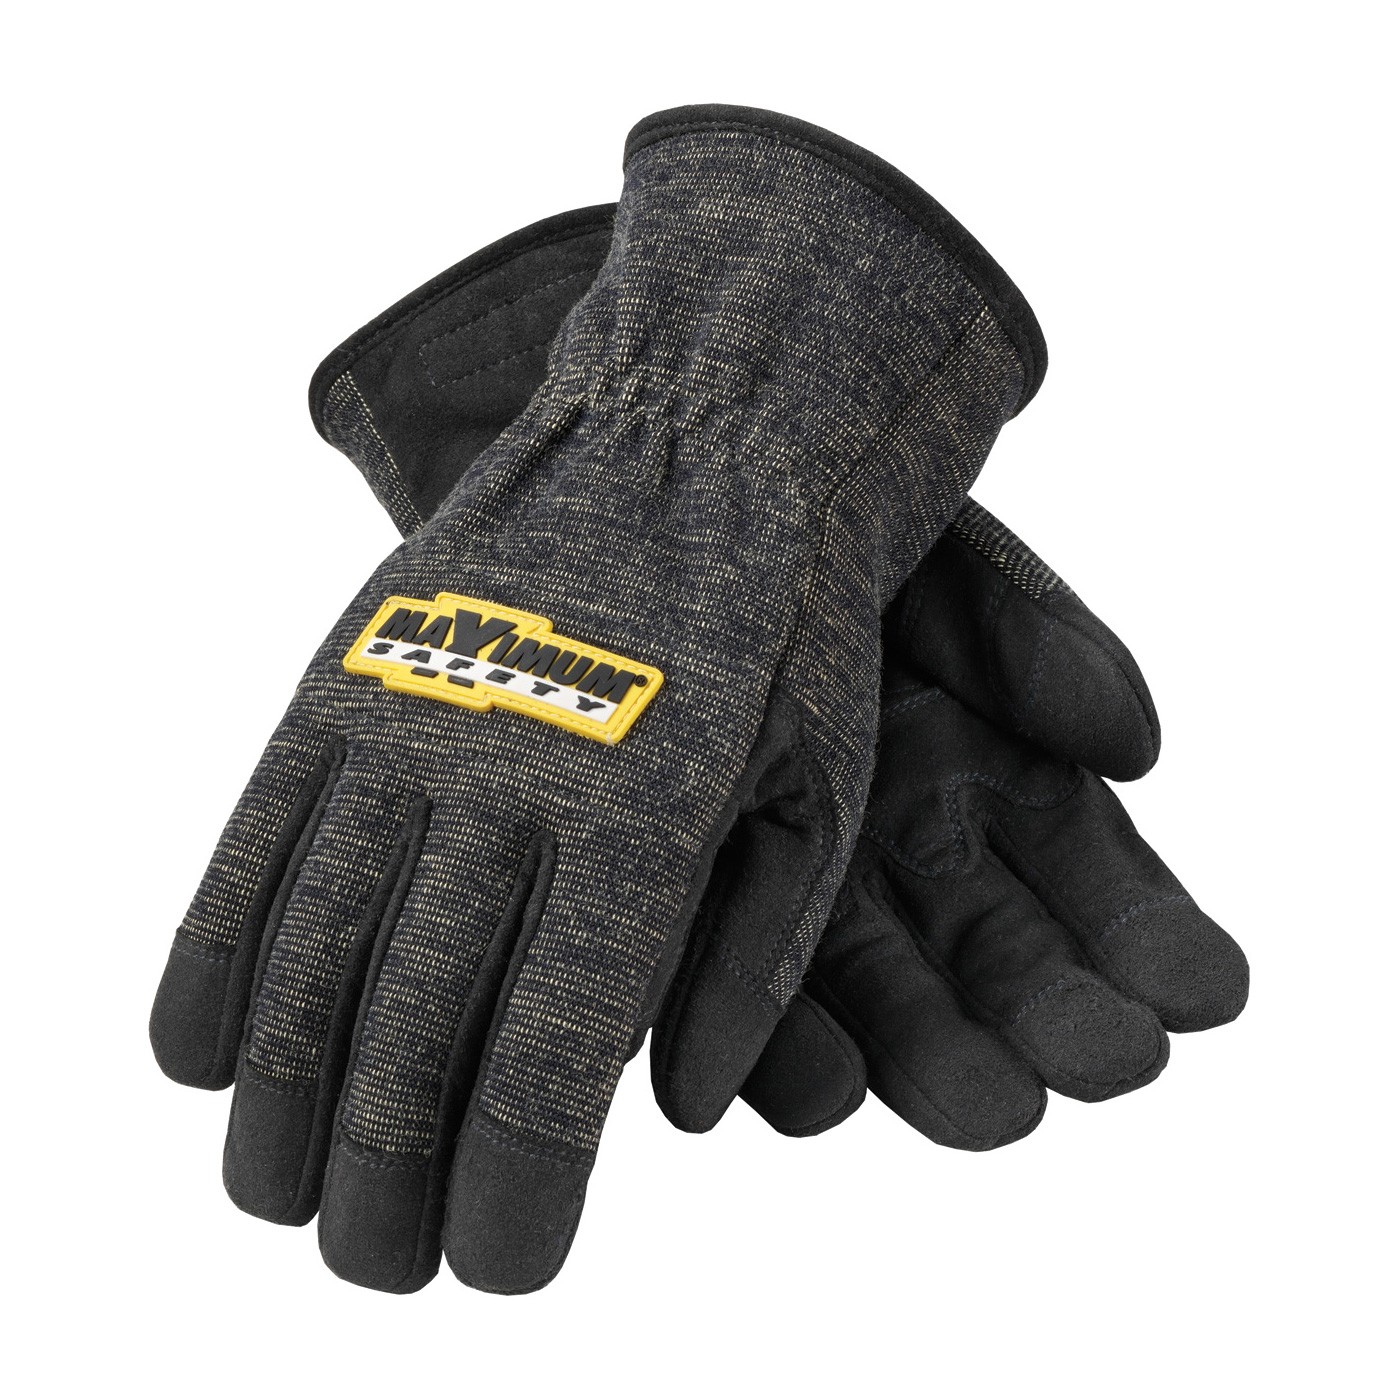 FR Treated Synthetic Leather Glove, Kevlar Lined, Reinforced Palm Size 2X-Large